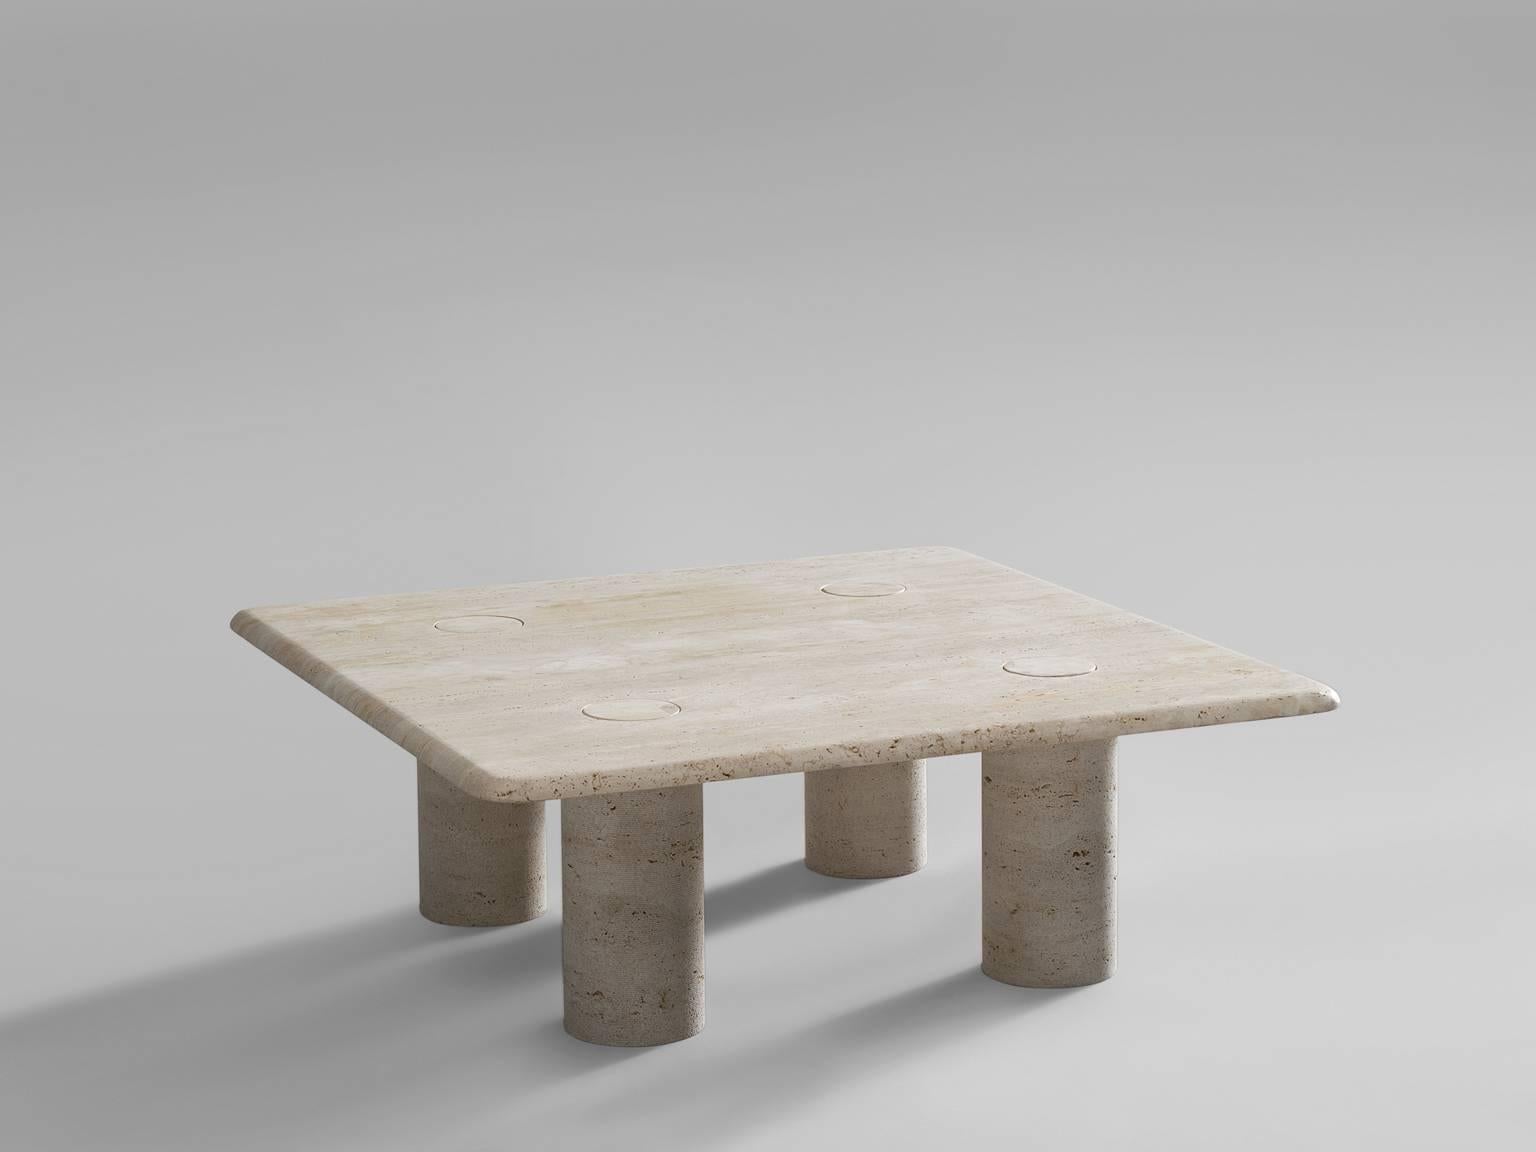 Coffee table in travertine, by Angelo Mangiarotti for Up&Up, Italy, 1970s.

This sculptural table by Angelo Mangiarotti is a skillful example of postmodern design. The cocktail table is executed in travertin. The square top features no joints or